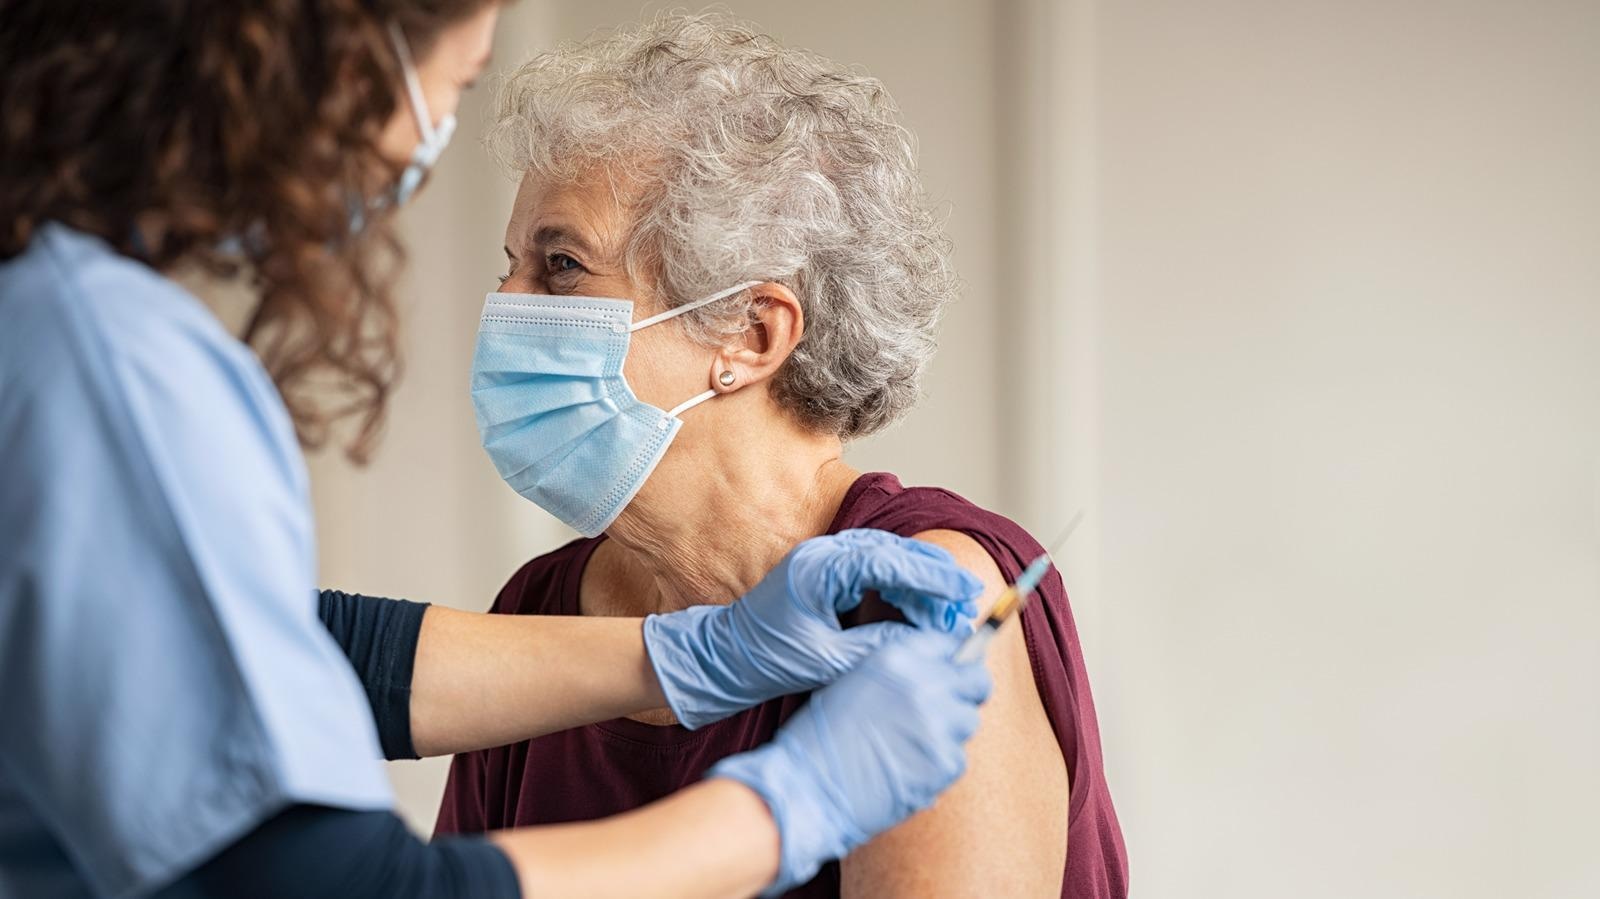 Study: Limited immune responses after three months of BNT162b2 vaccine in SARS-CoV-2 uninfected elders living in long-term care facilities. Image Credit: Rido / Shutterstock